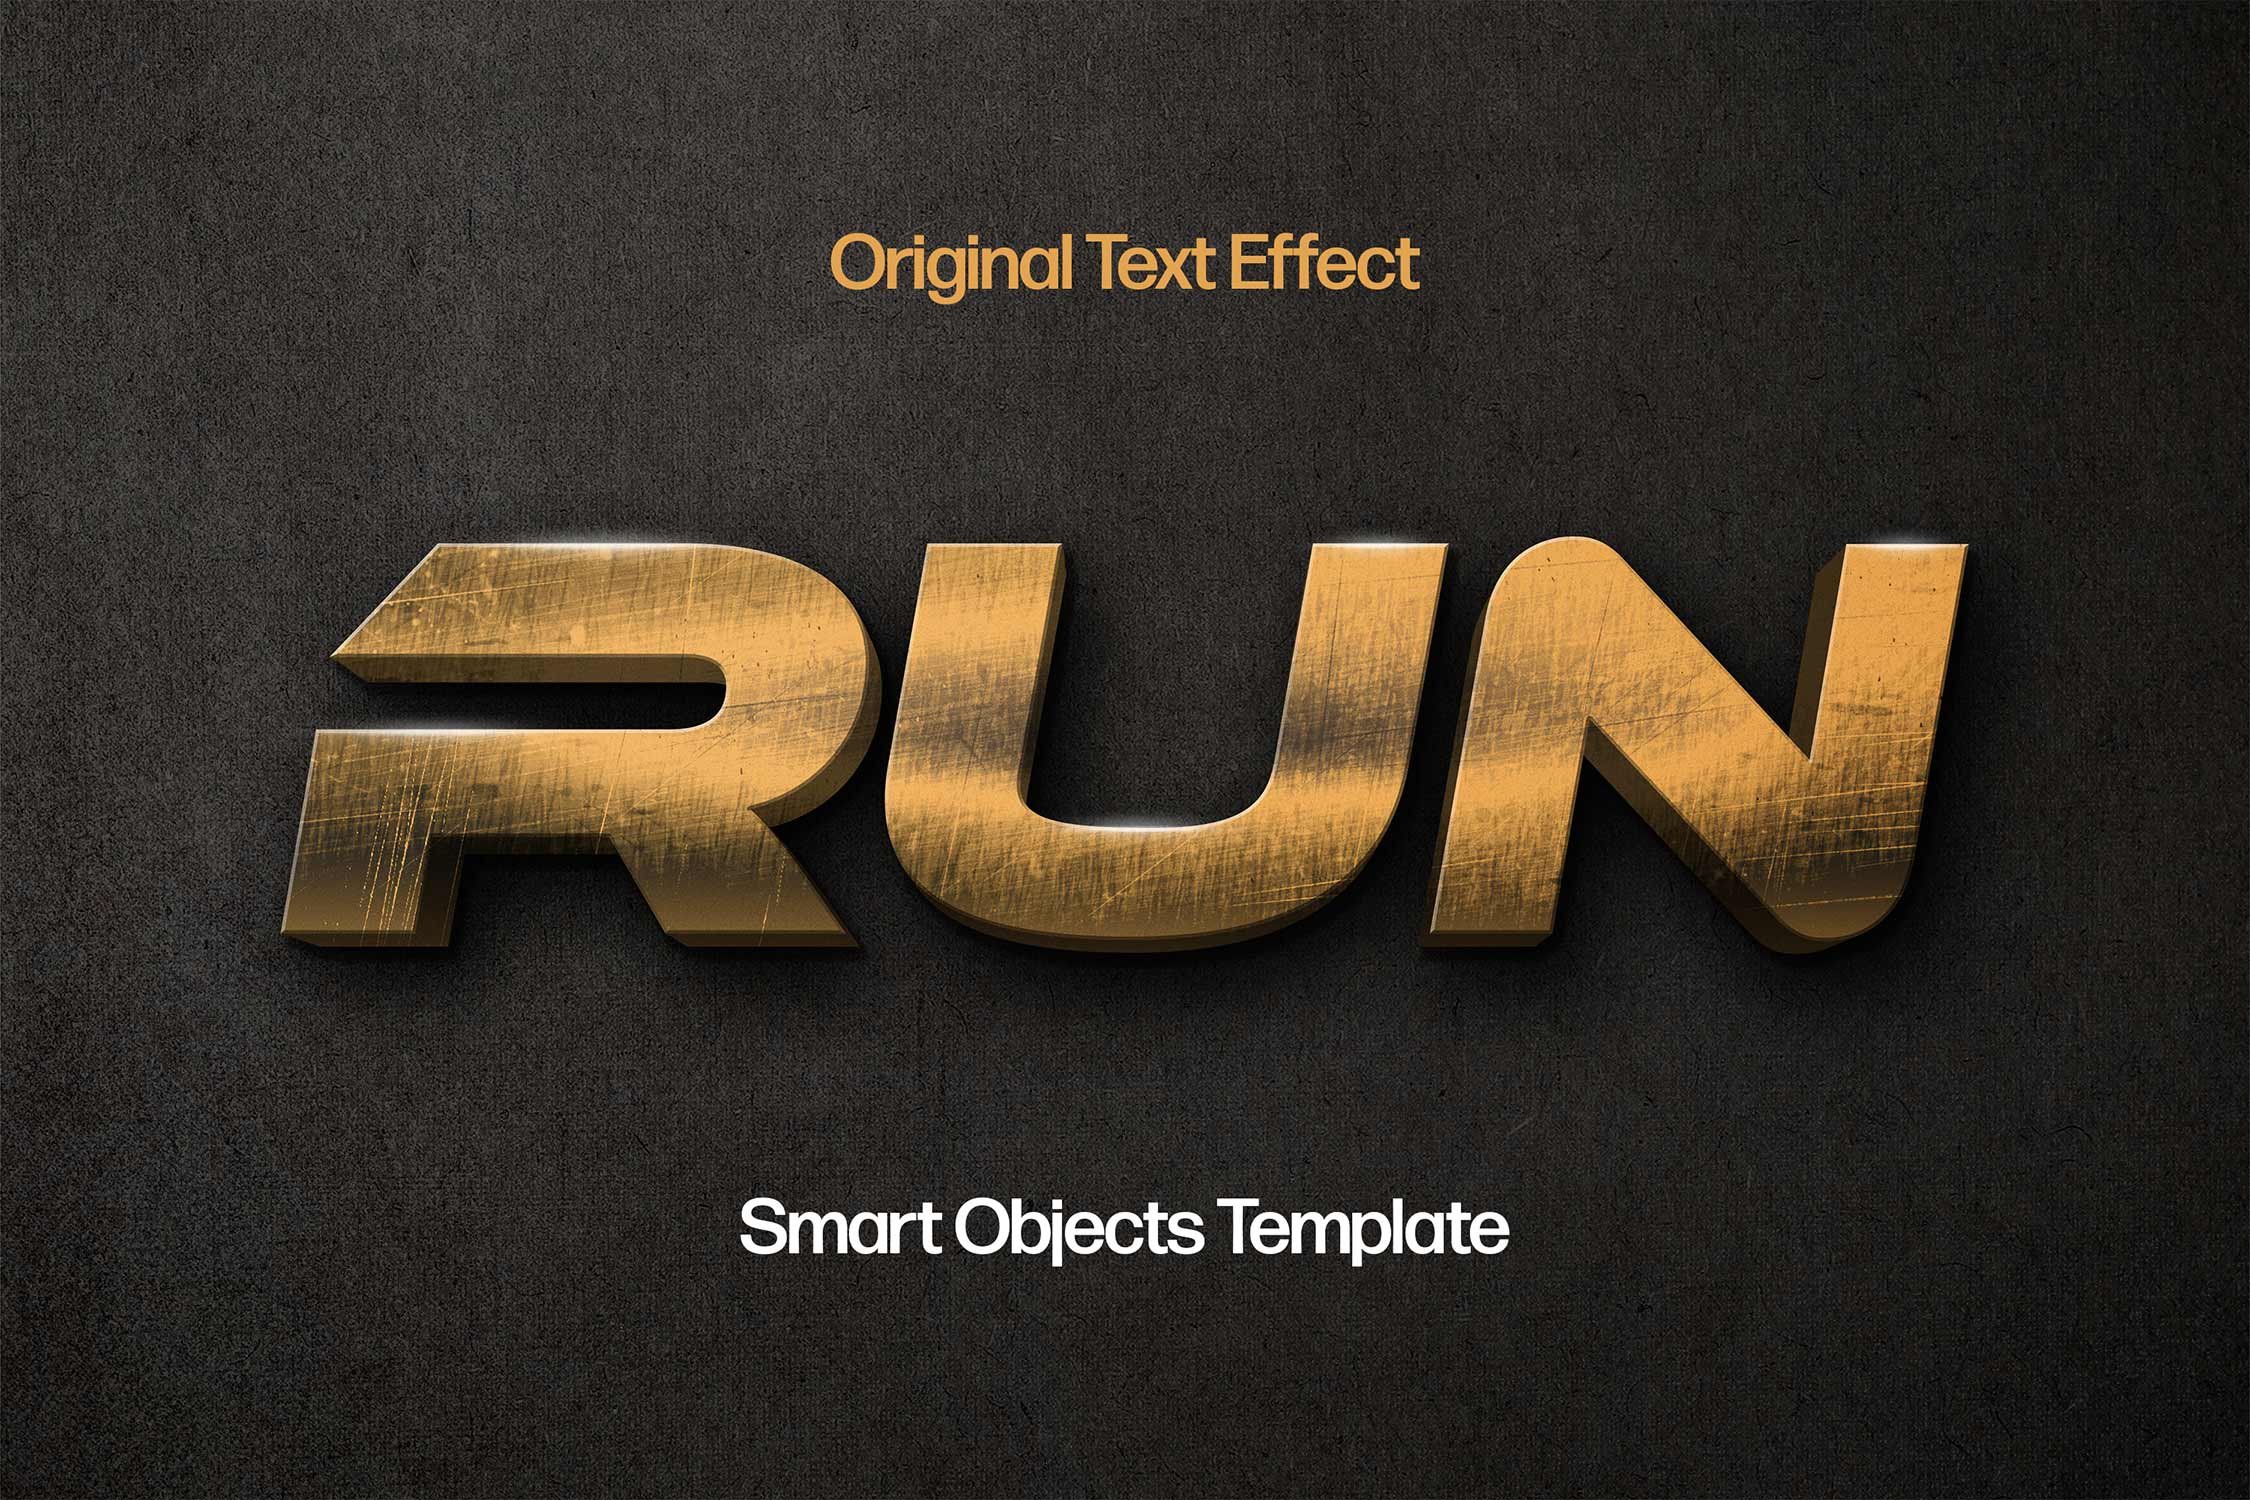 Exercise Text Effect and Logo Design Word